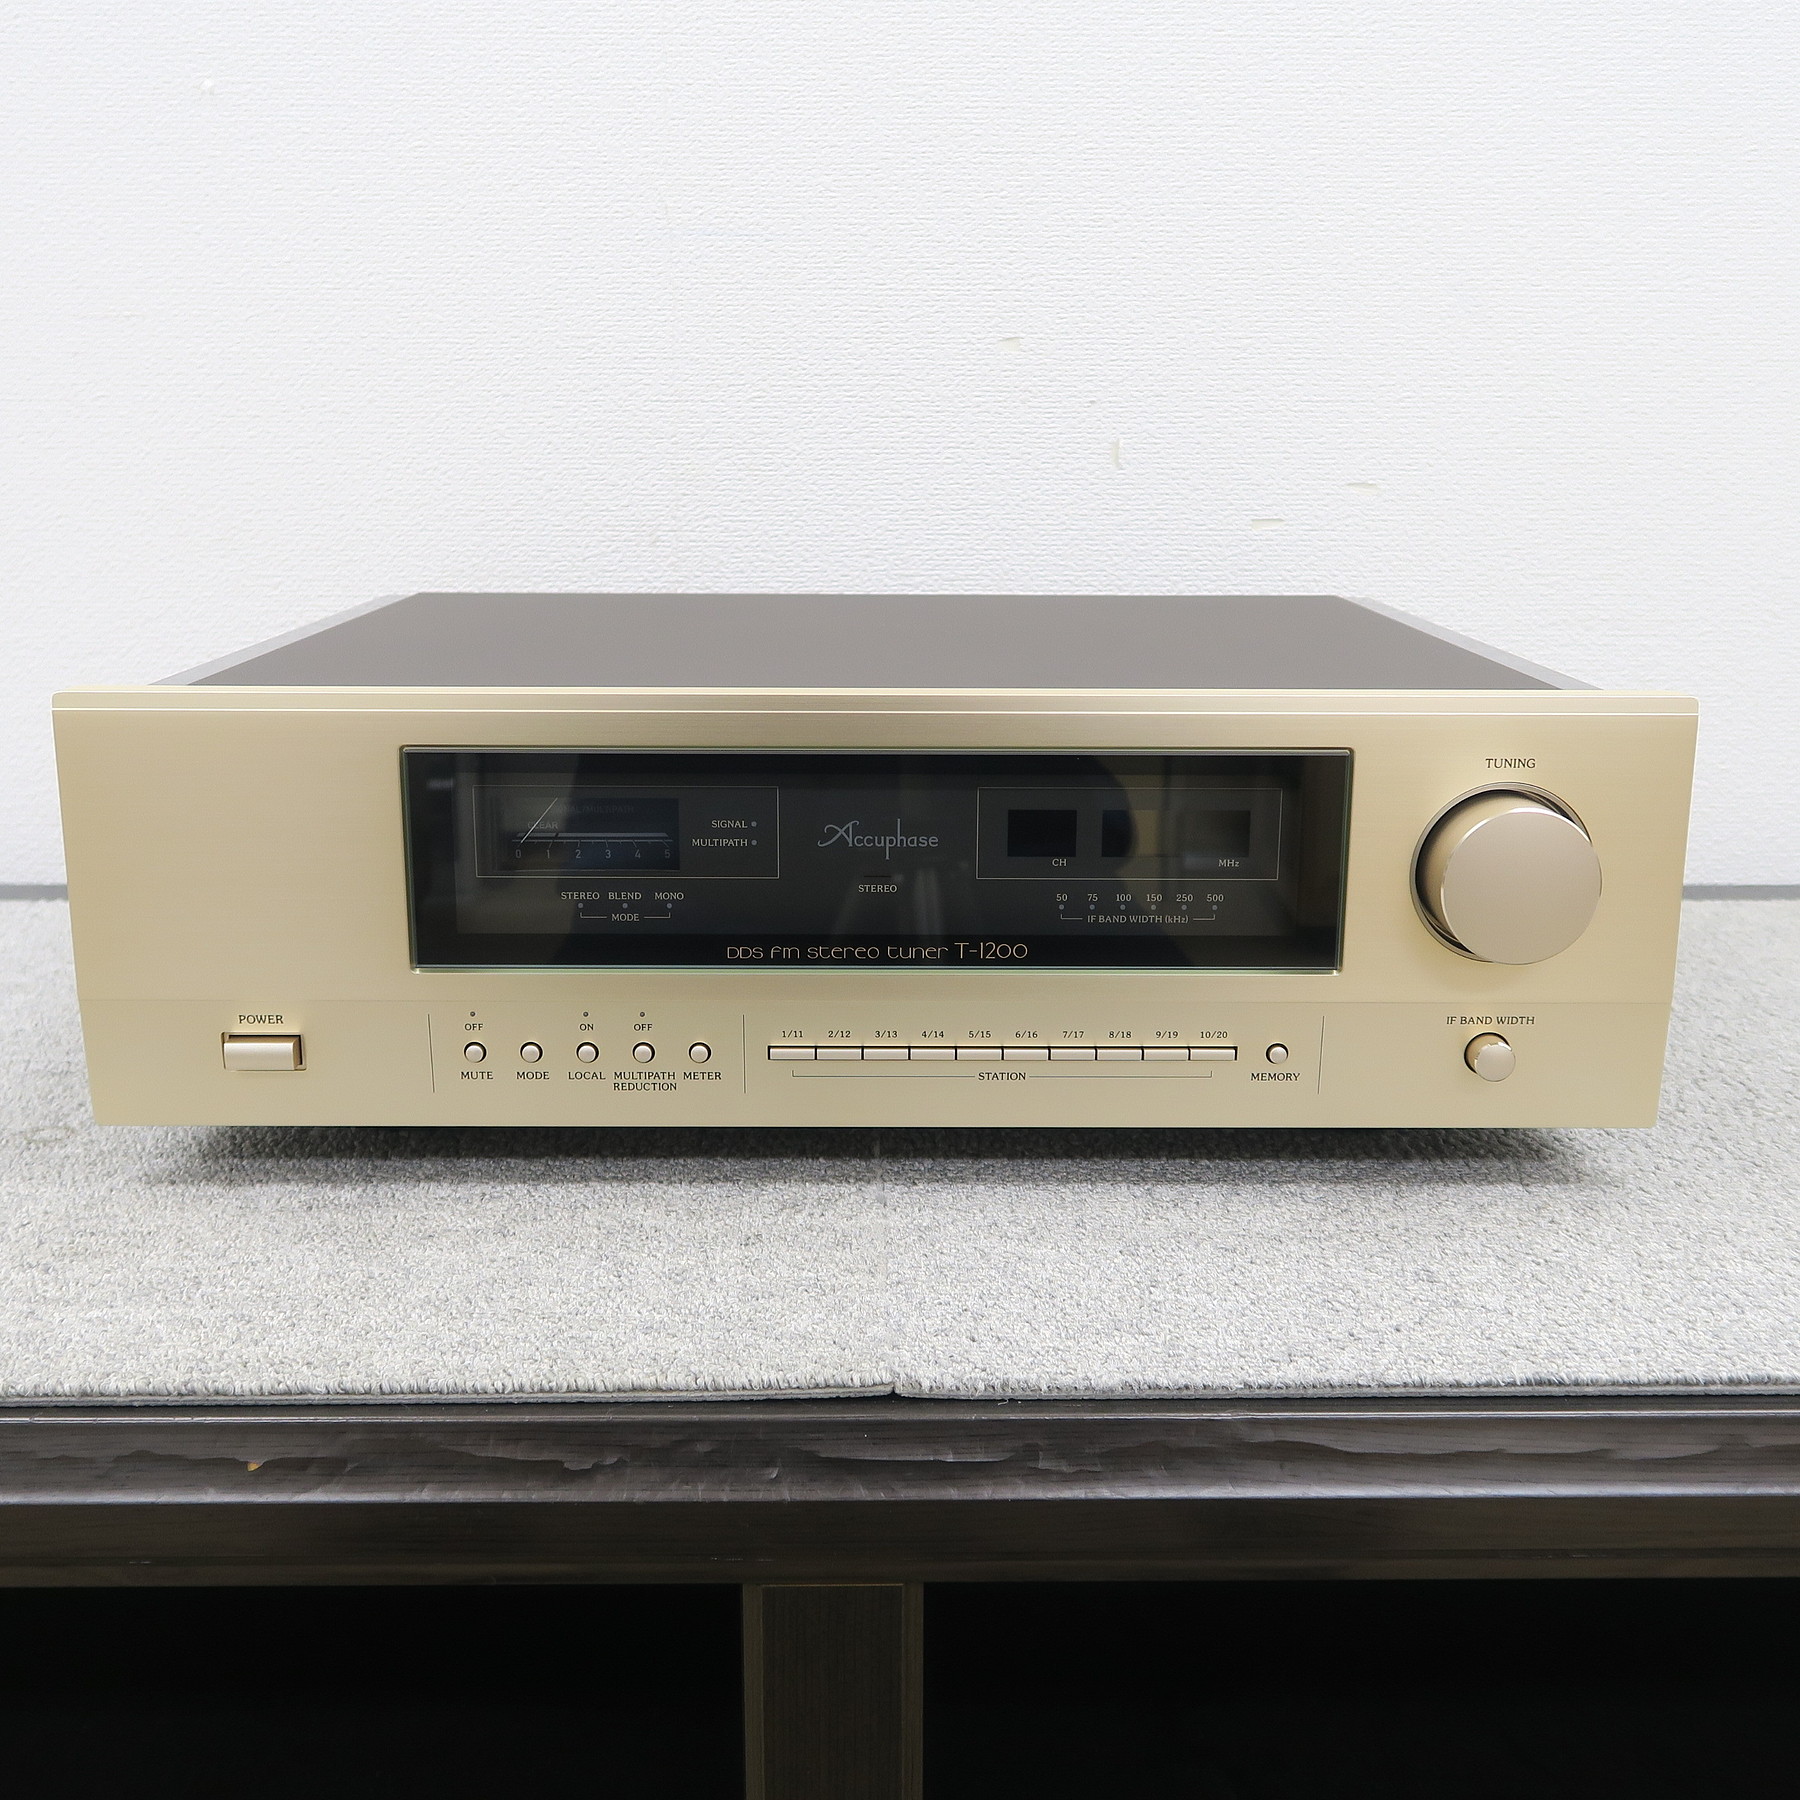 Aランク】Accuphase T-1200 チューナー アキュフェーズ @55749 / 中古